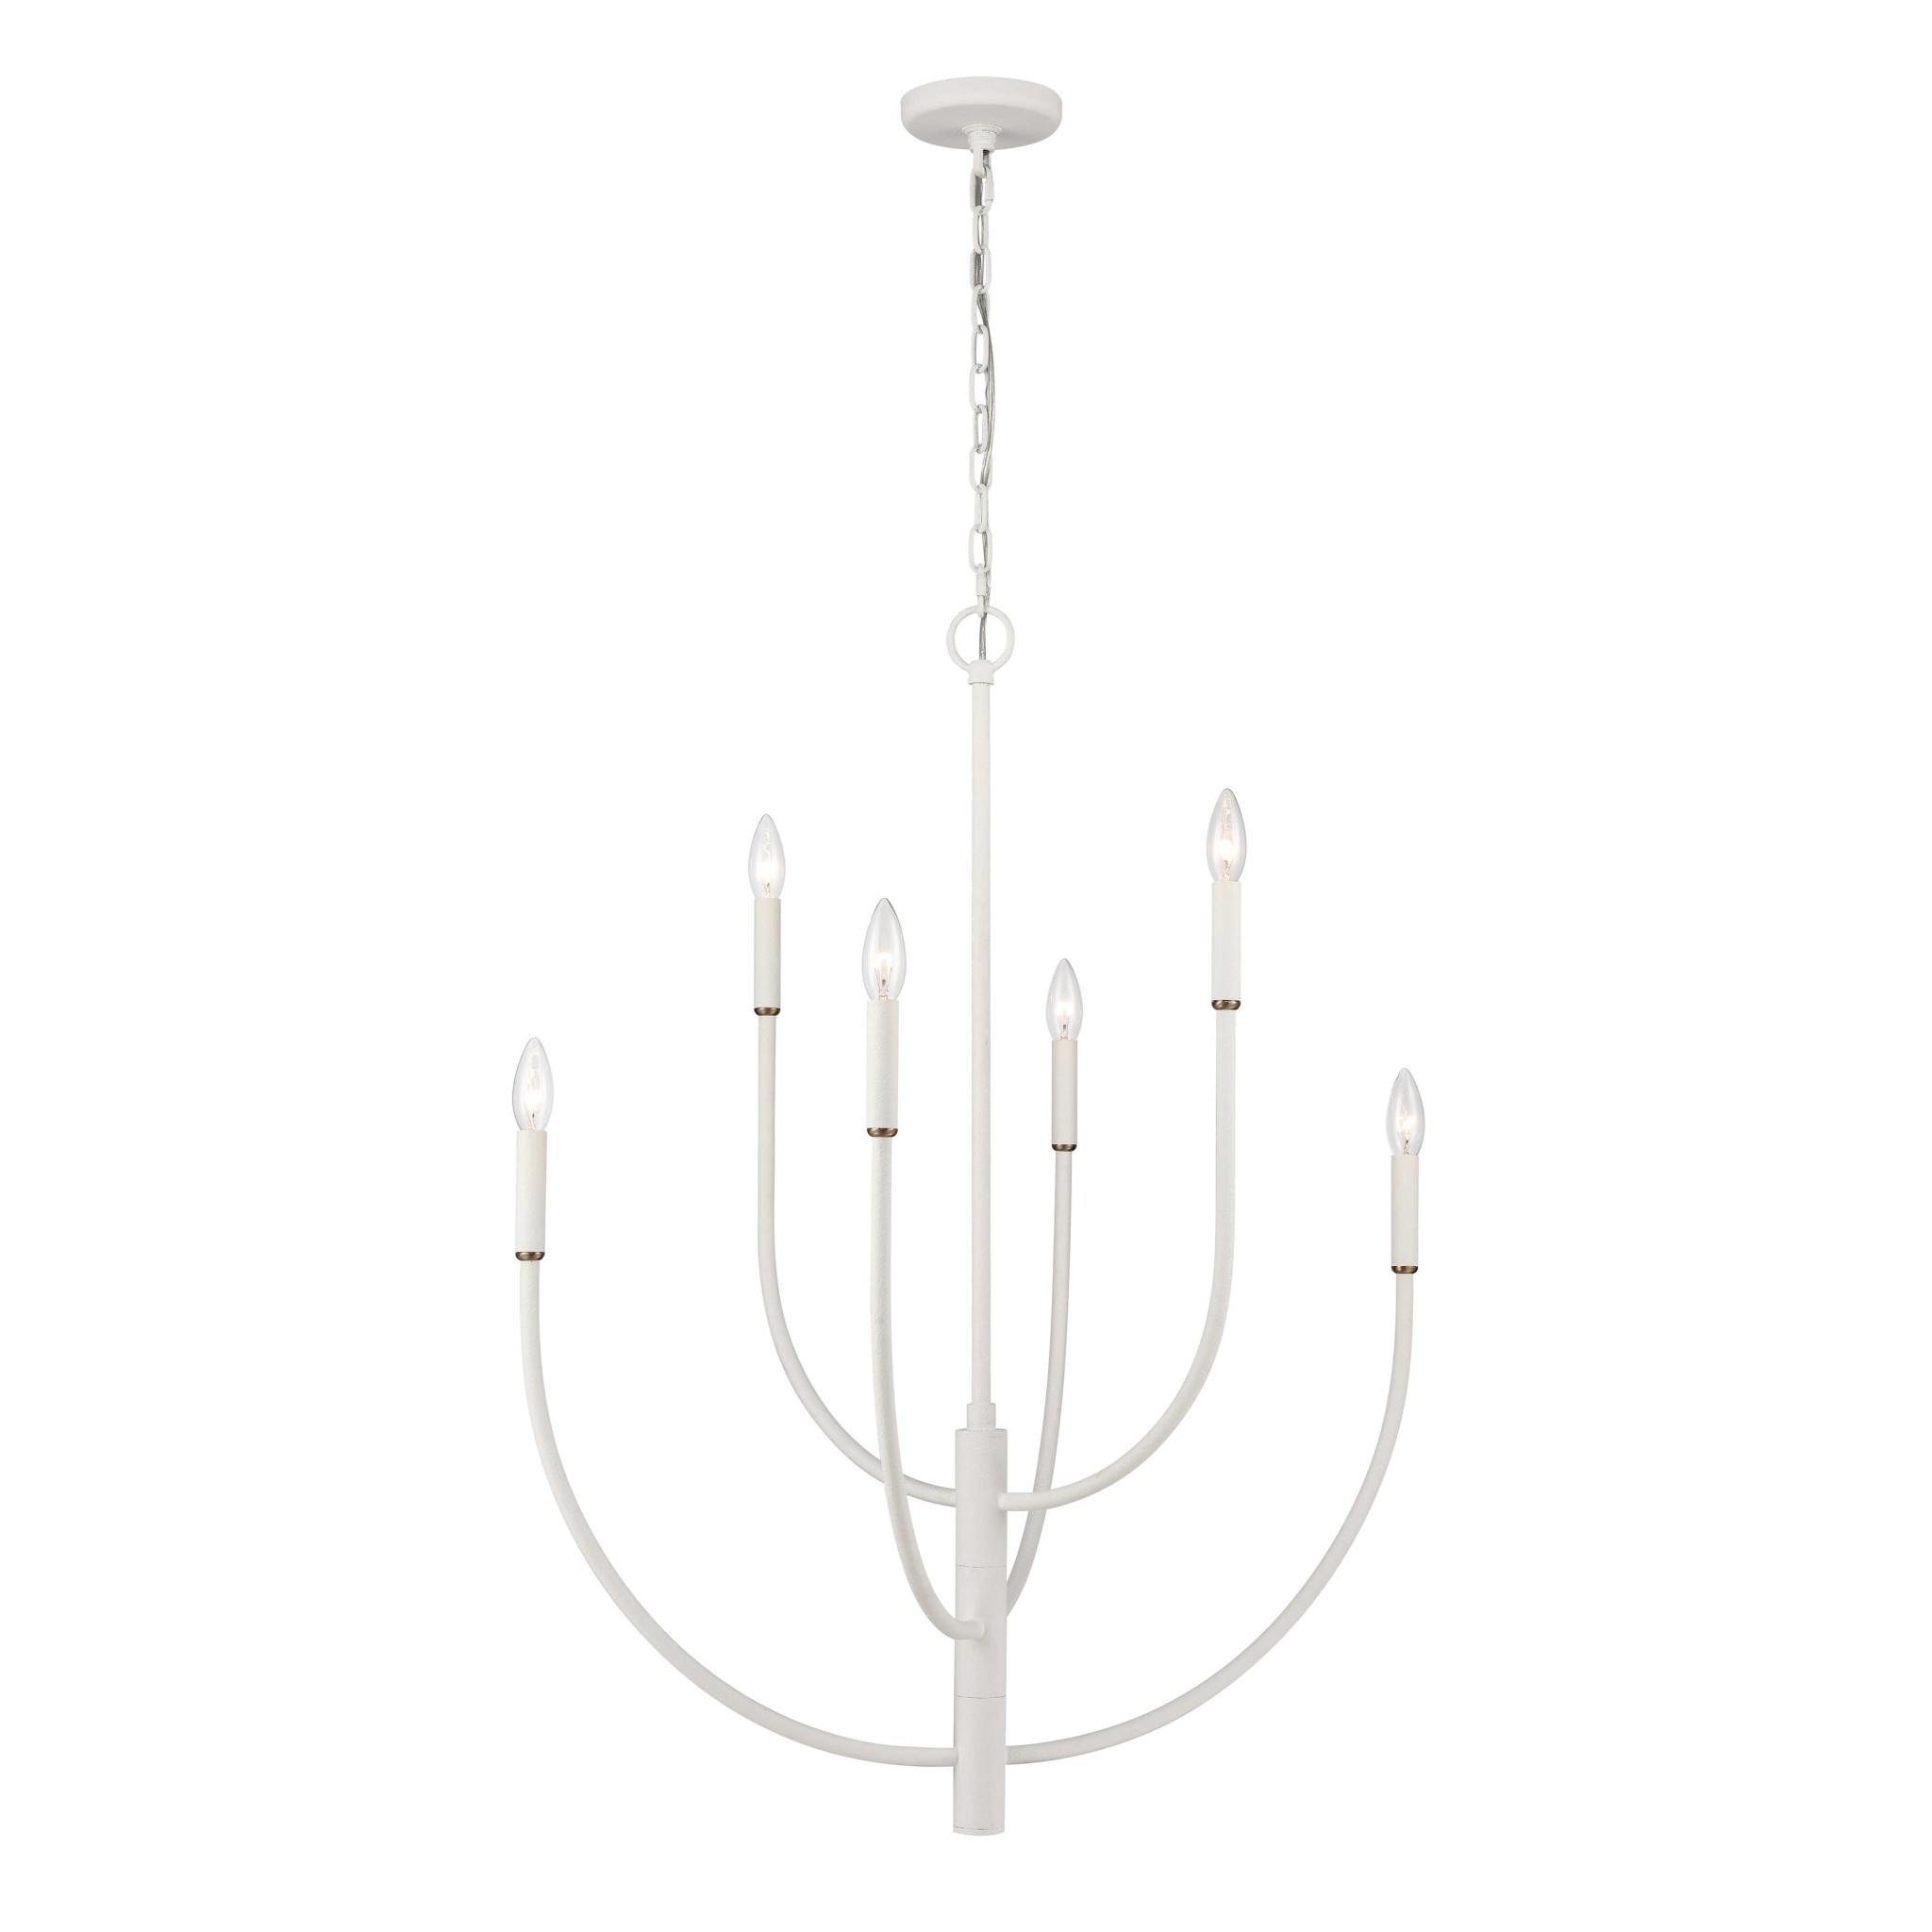 Continuance Multi Light Powdercoated Metal Chandelier, White Coral, 25"w x 37"h, Available for local pick up